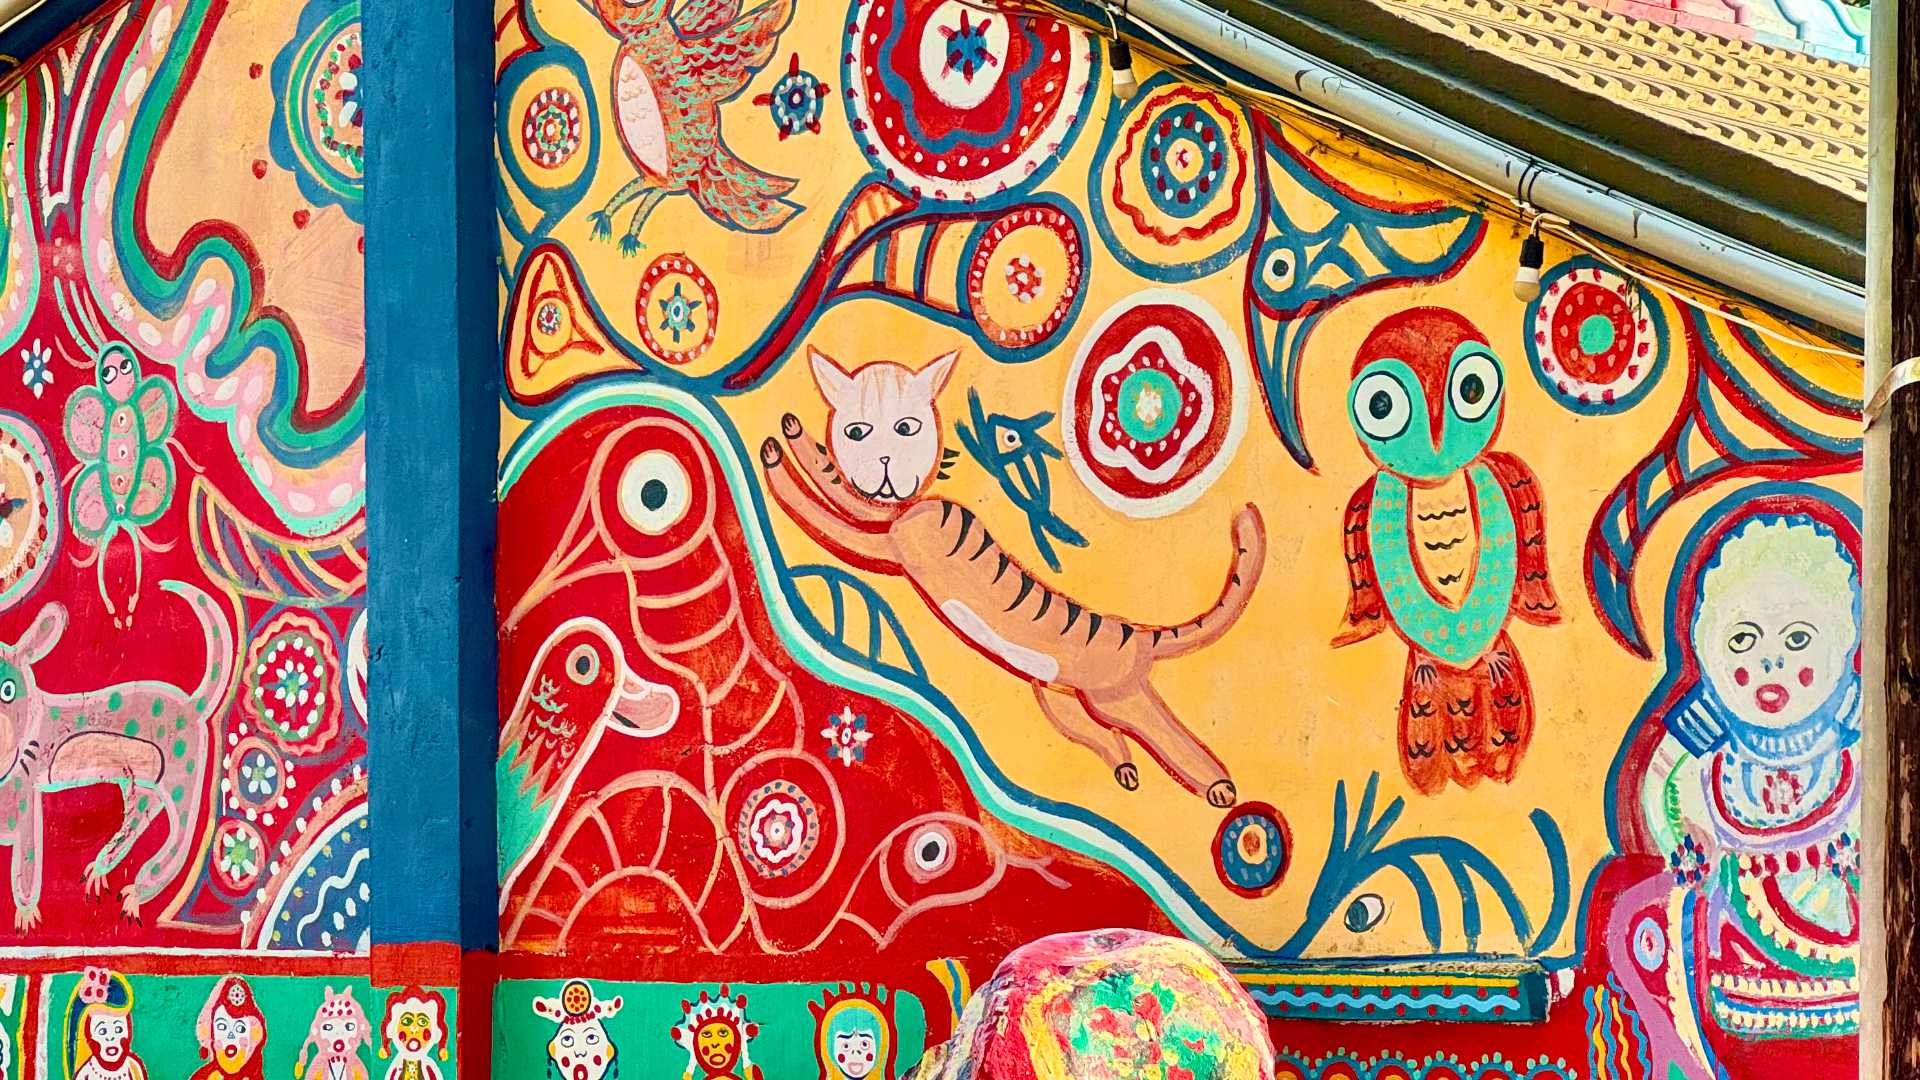 A wall of a building at Rainbow Village (彩虹眷村) in Taichung, Taiwan. Amongst the figures painted on this wall is a cartoonish Taiwan leopard cat.